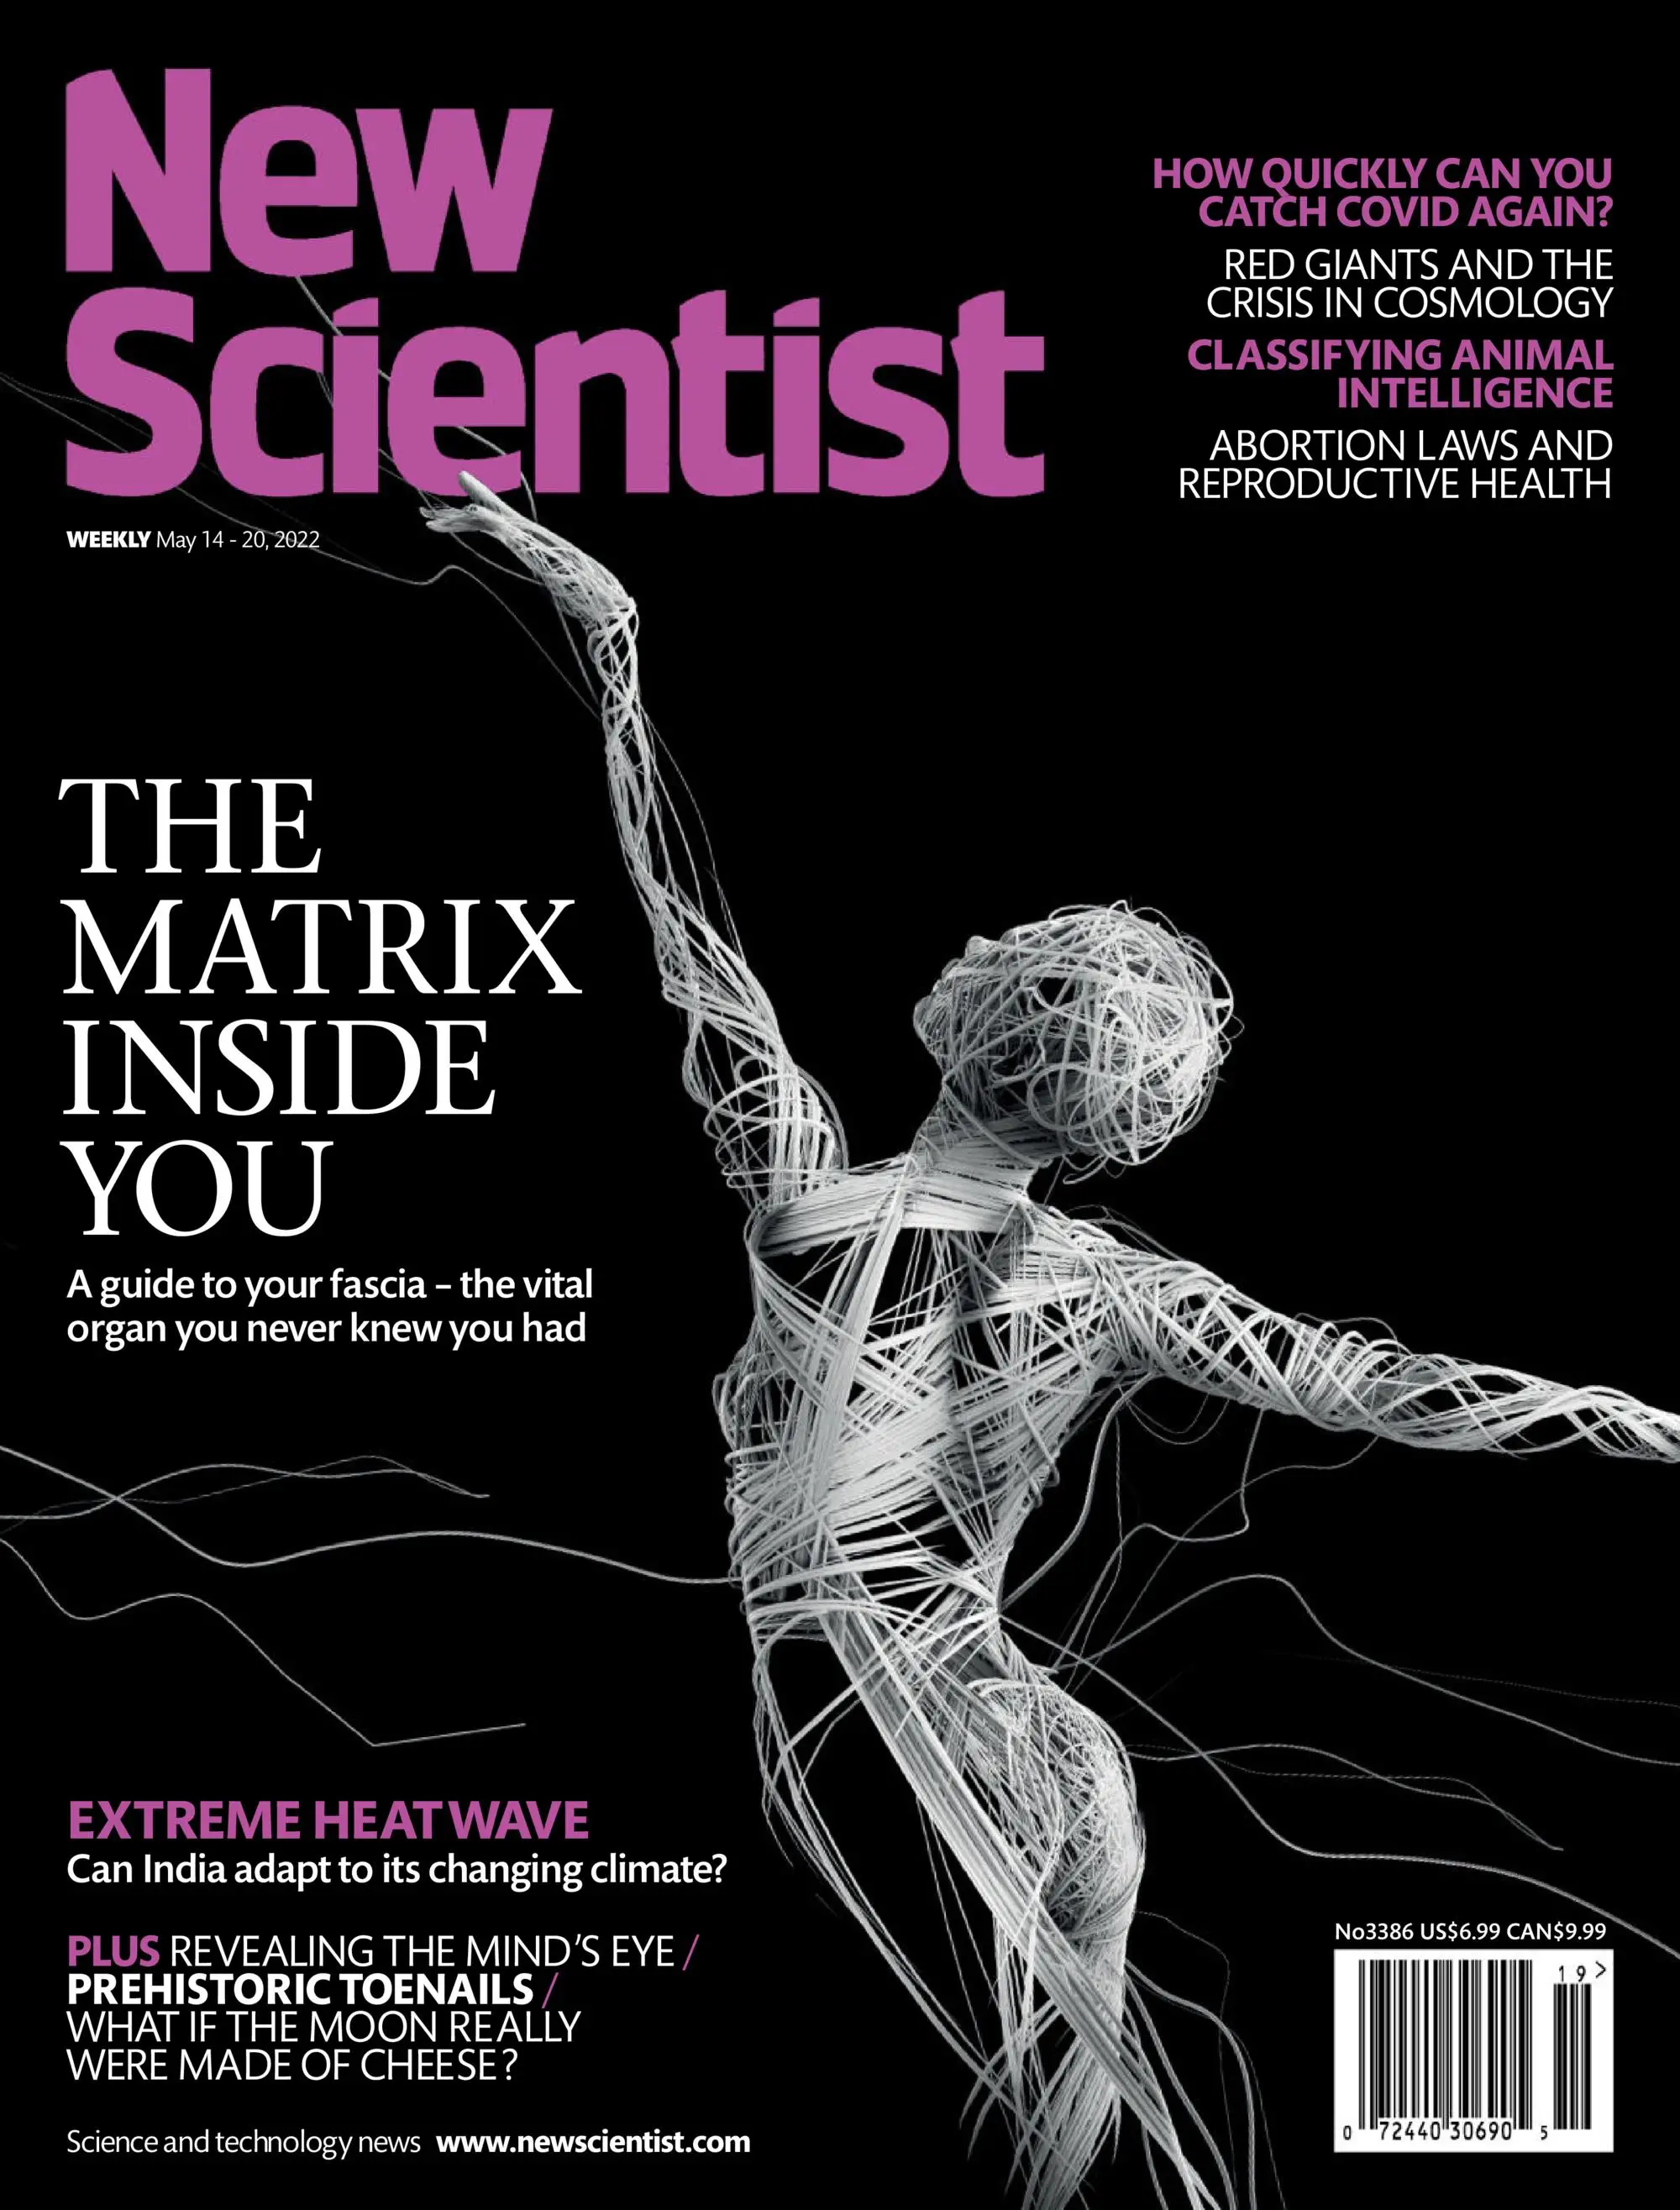 New Scientist - May 14, 2022